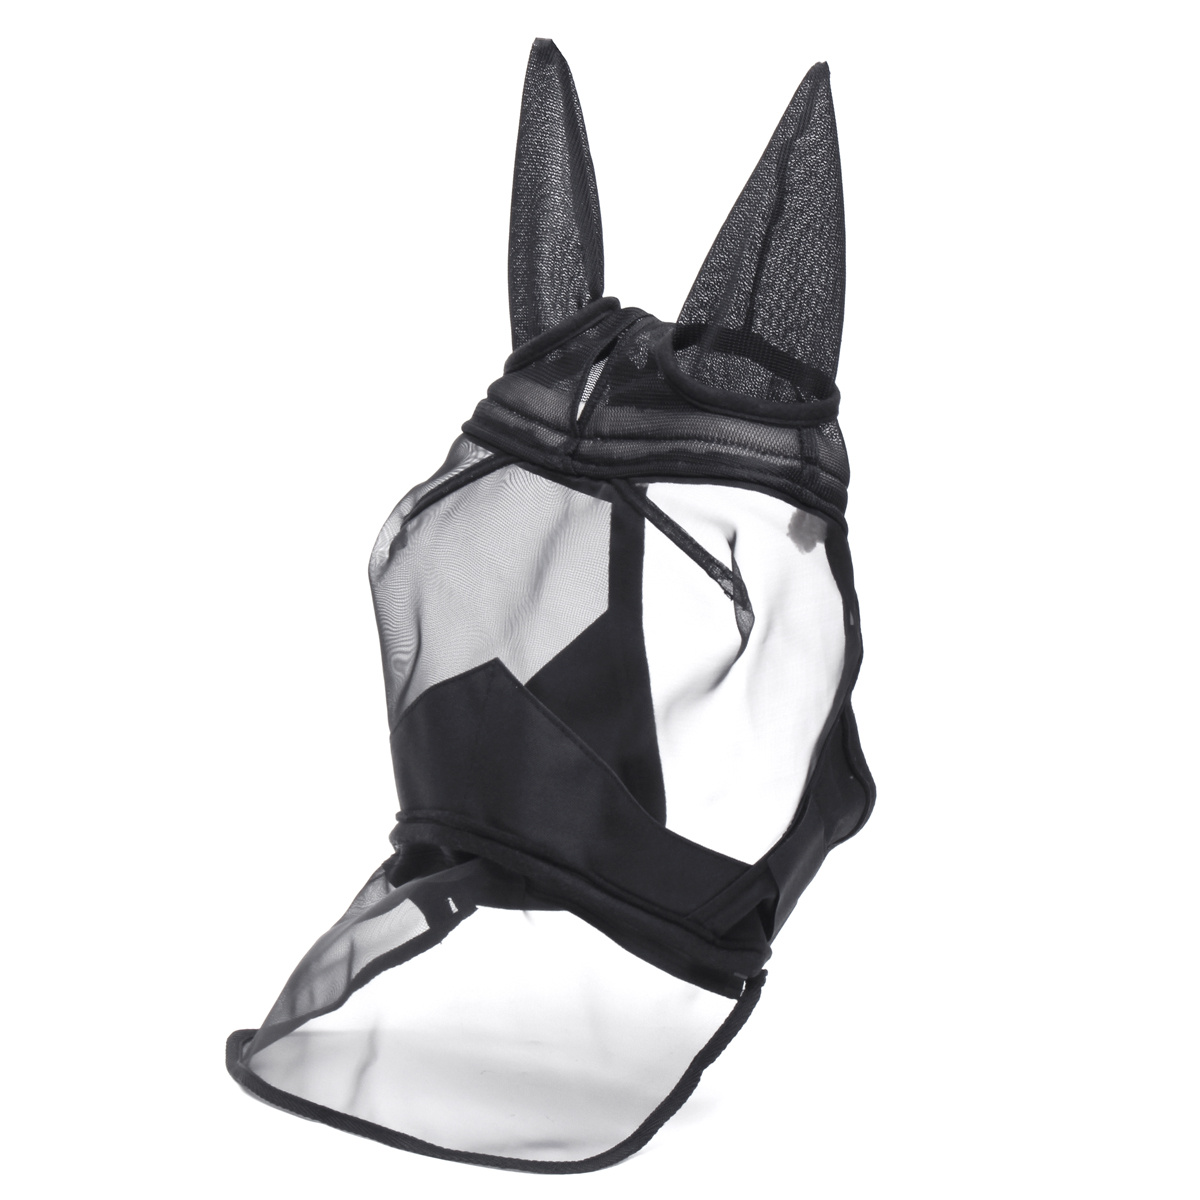 Deluxe-Horse-Fly-Mask-with-Ears-Mesh-Anti-mosquito-Zipper-Style-PonyCobFull-Horse-Spurs-1633817-3